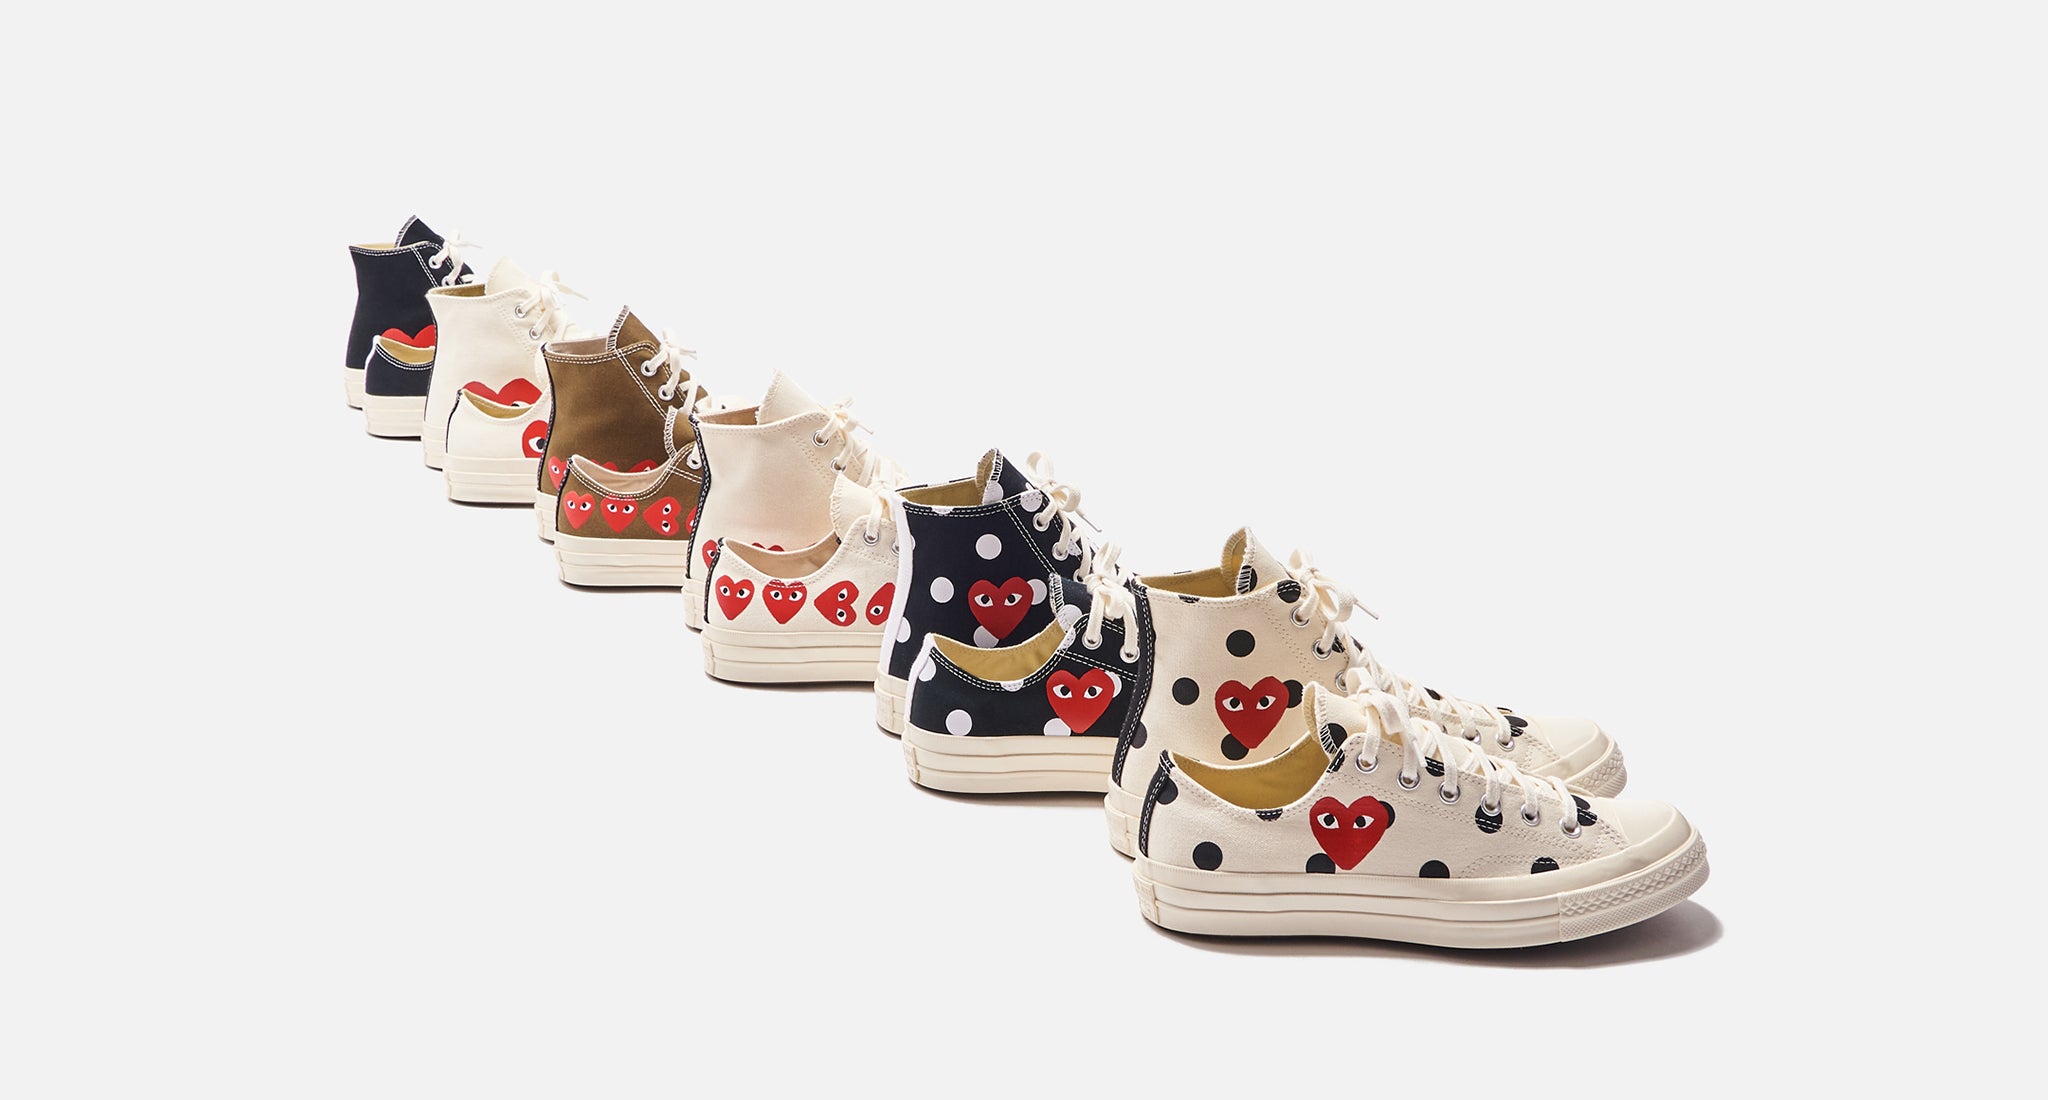 cdg shoes near me